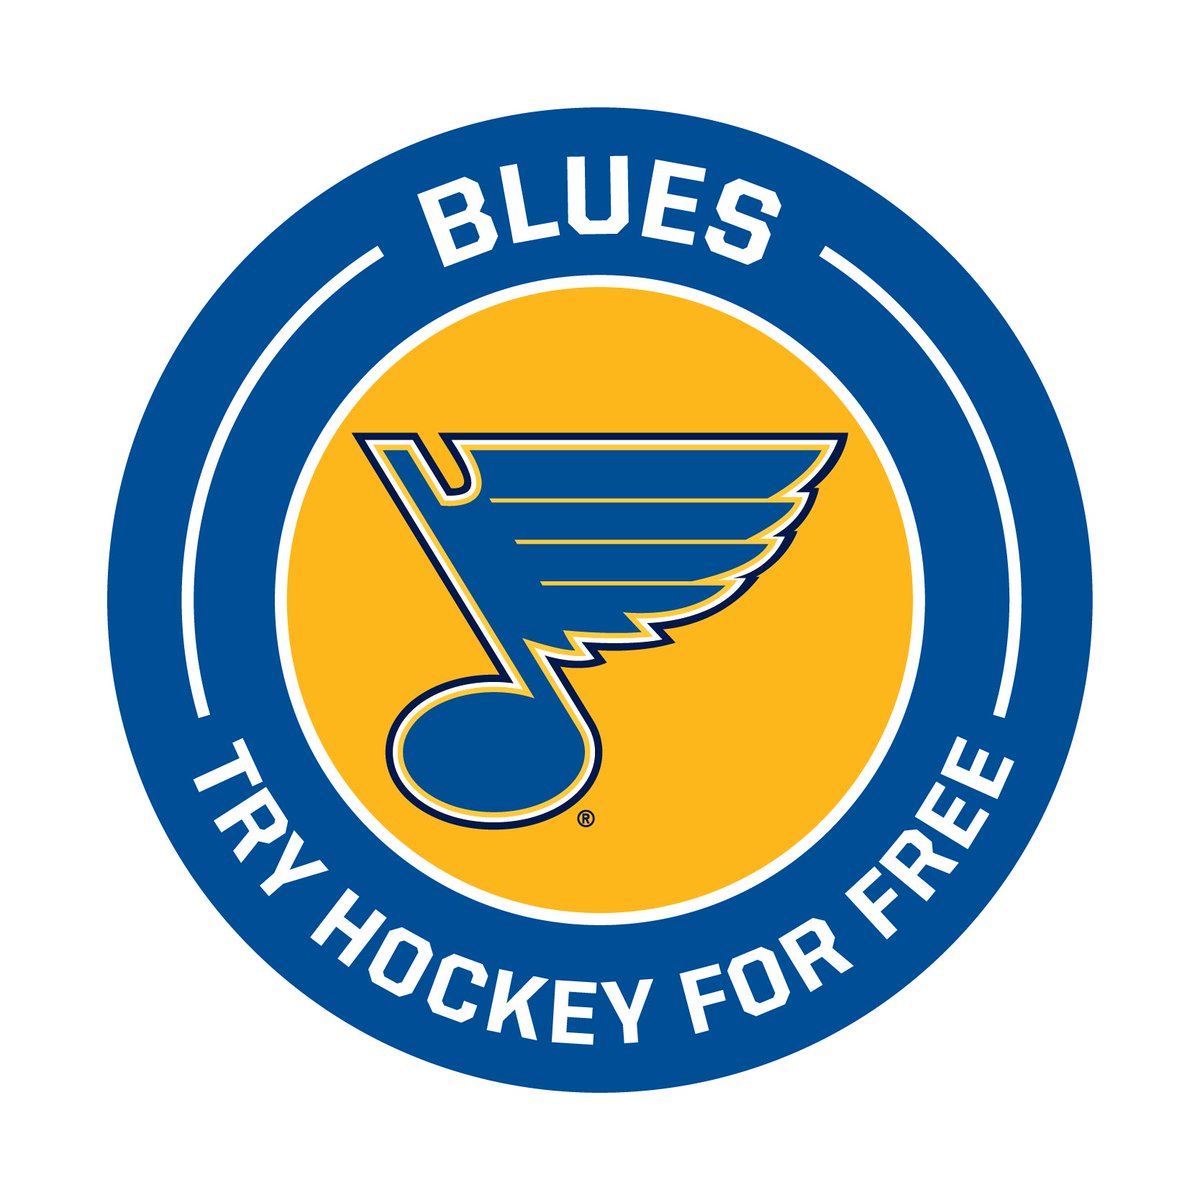 Children ages 4-9 who want to get into hockey can try hockey for free at Centene Community Ice Center on Sunday, May 5th!   For more information and to register for the event, click the link below.   stlouisbluesyouthhockey.com/program/try-ho… @firstcommunity @STLCIC